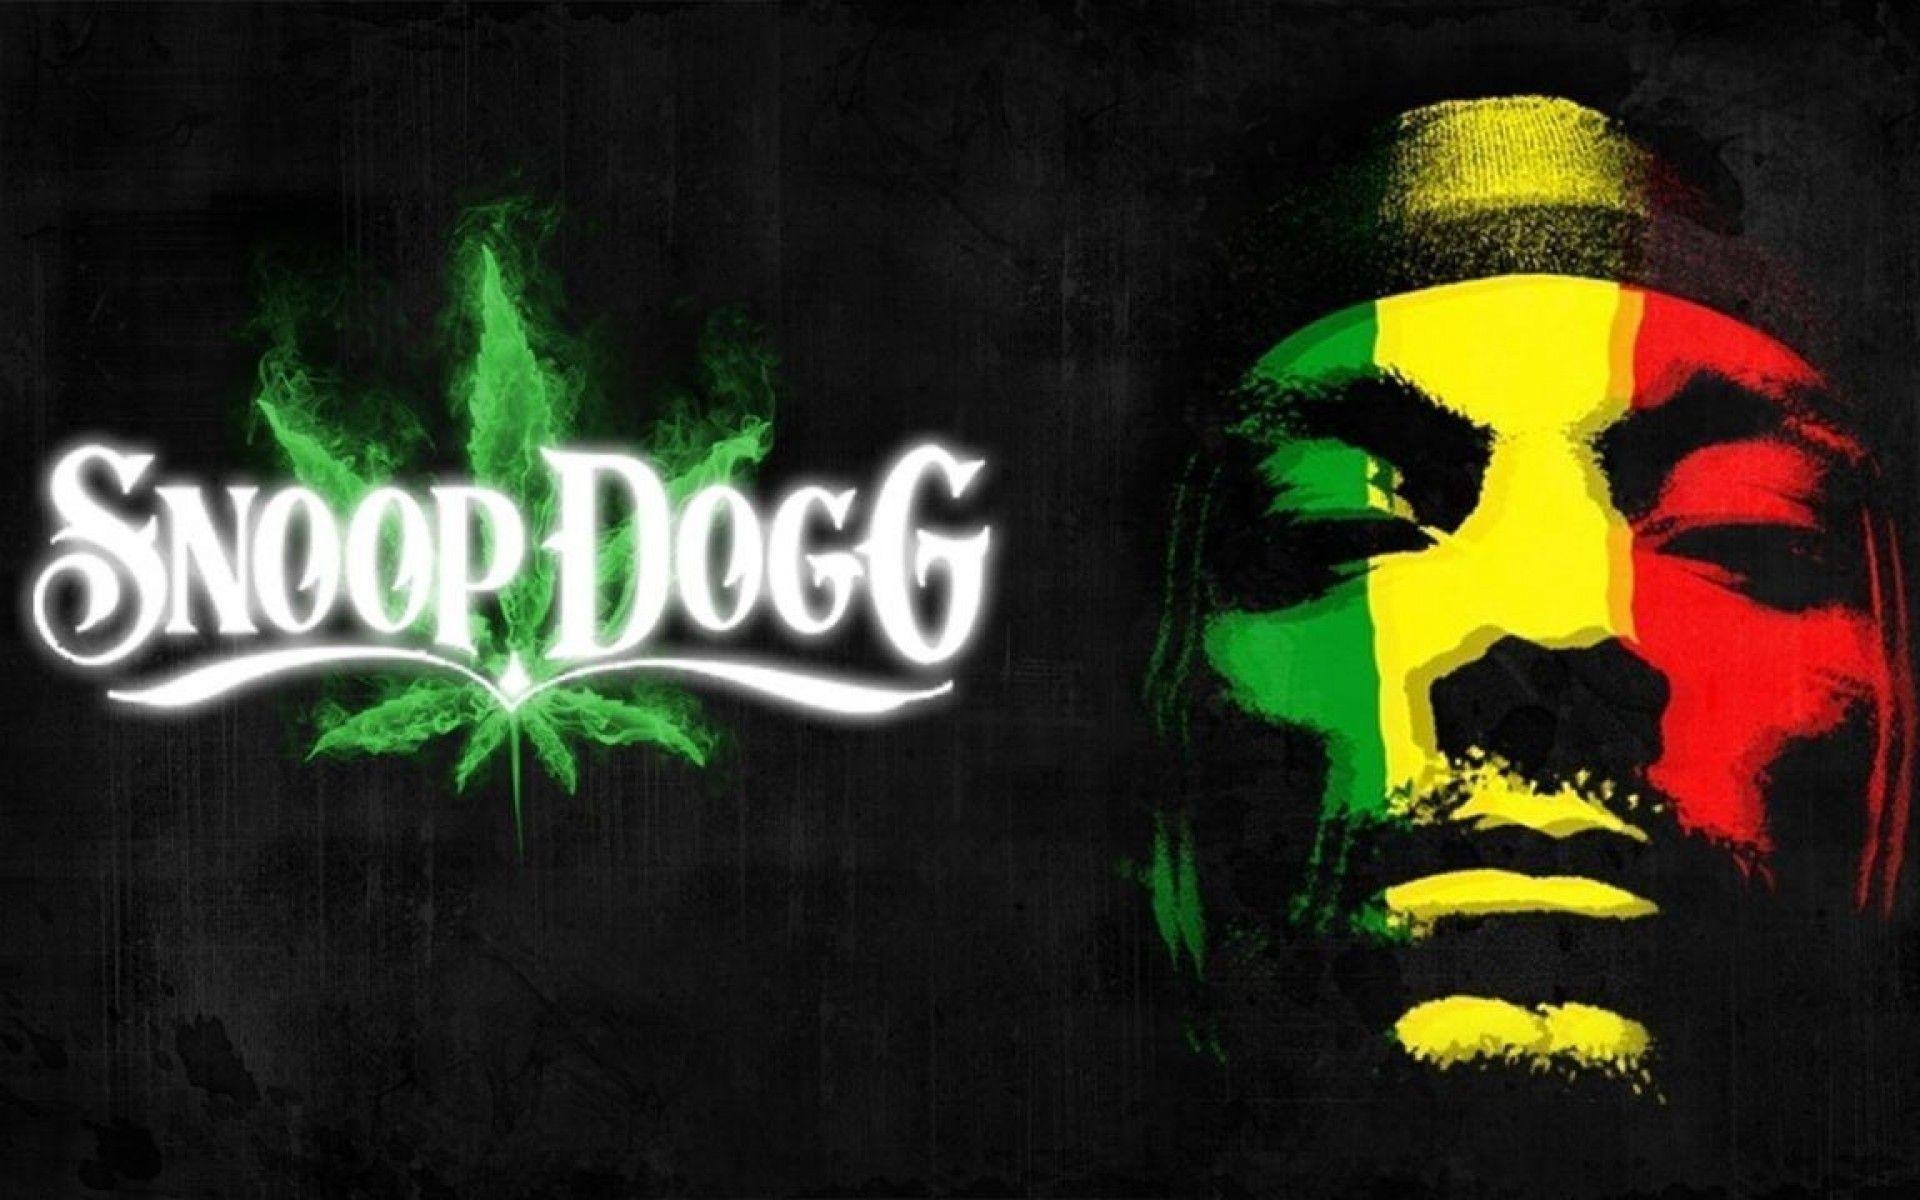 1920x1200  Snoop Dogg Wallpapers HD | Snoop Dogg Wallpapers, Backgrounds .